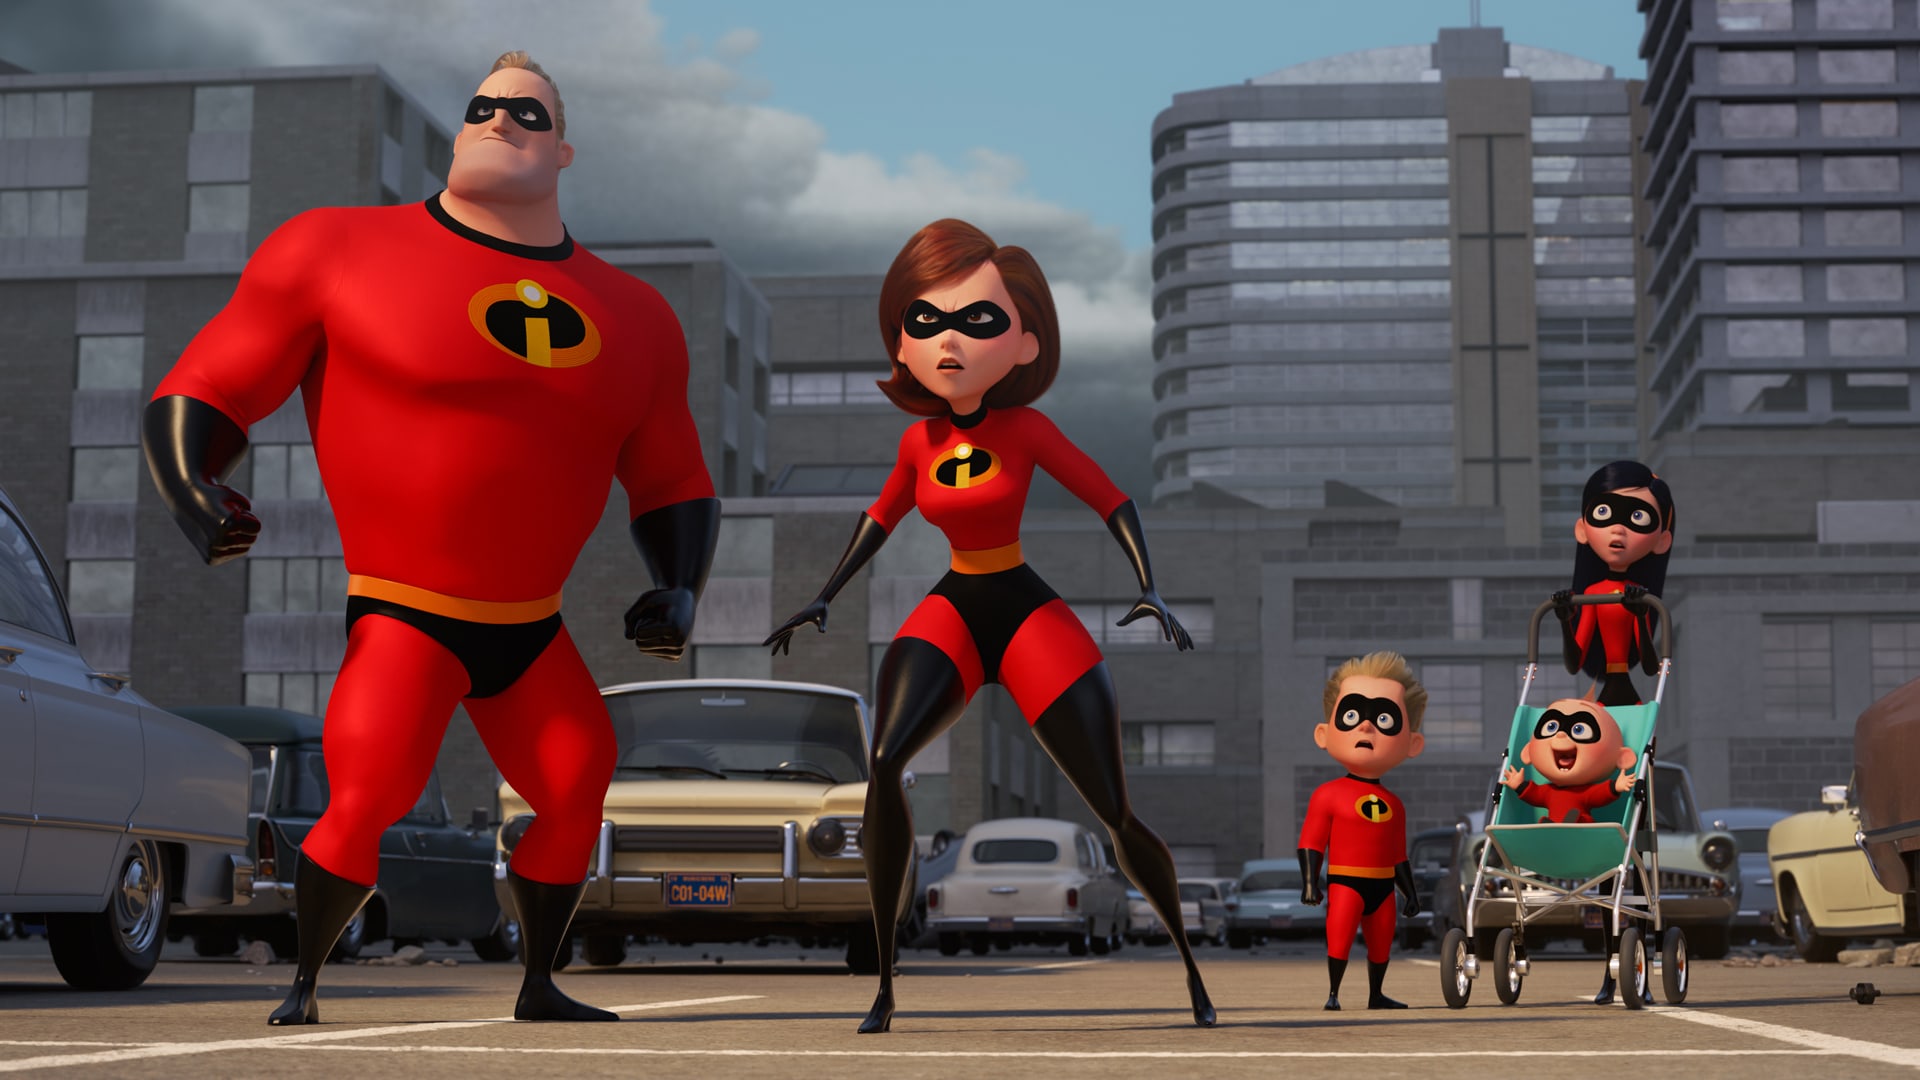 “The Incredibles 2” shatters box office records with $180 million